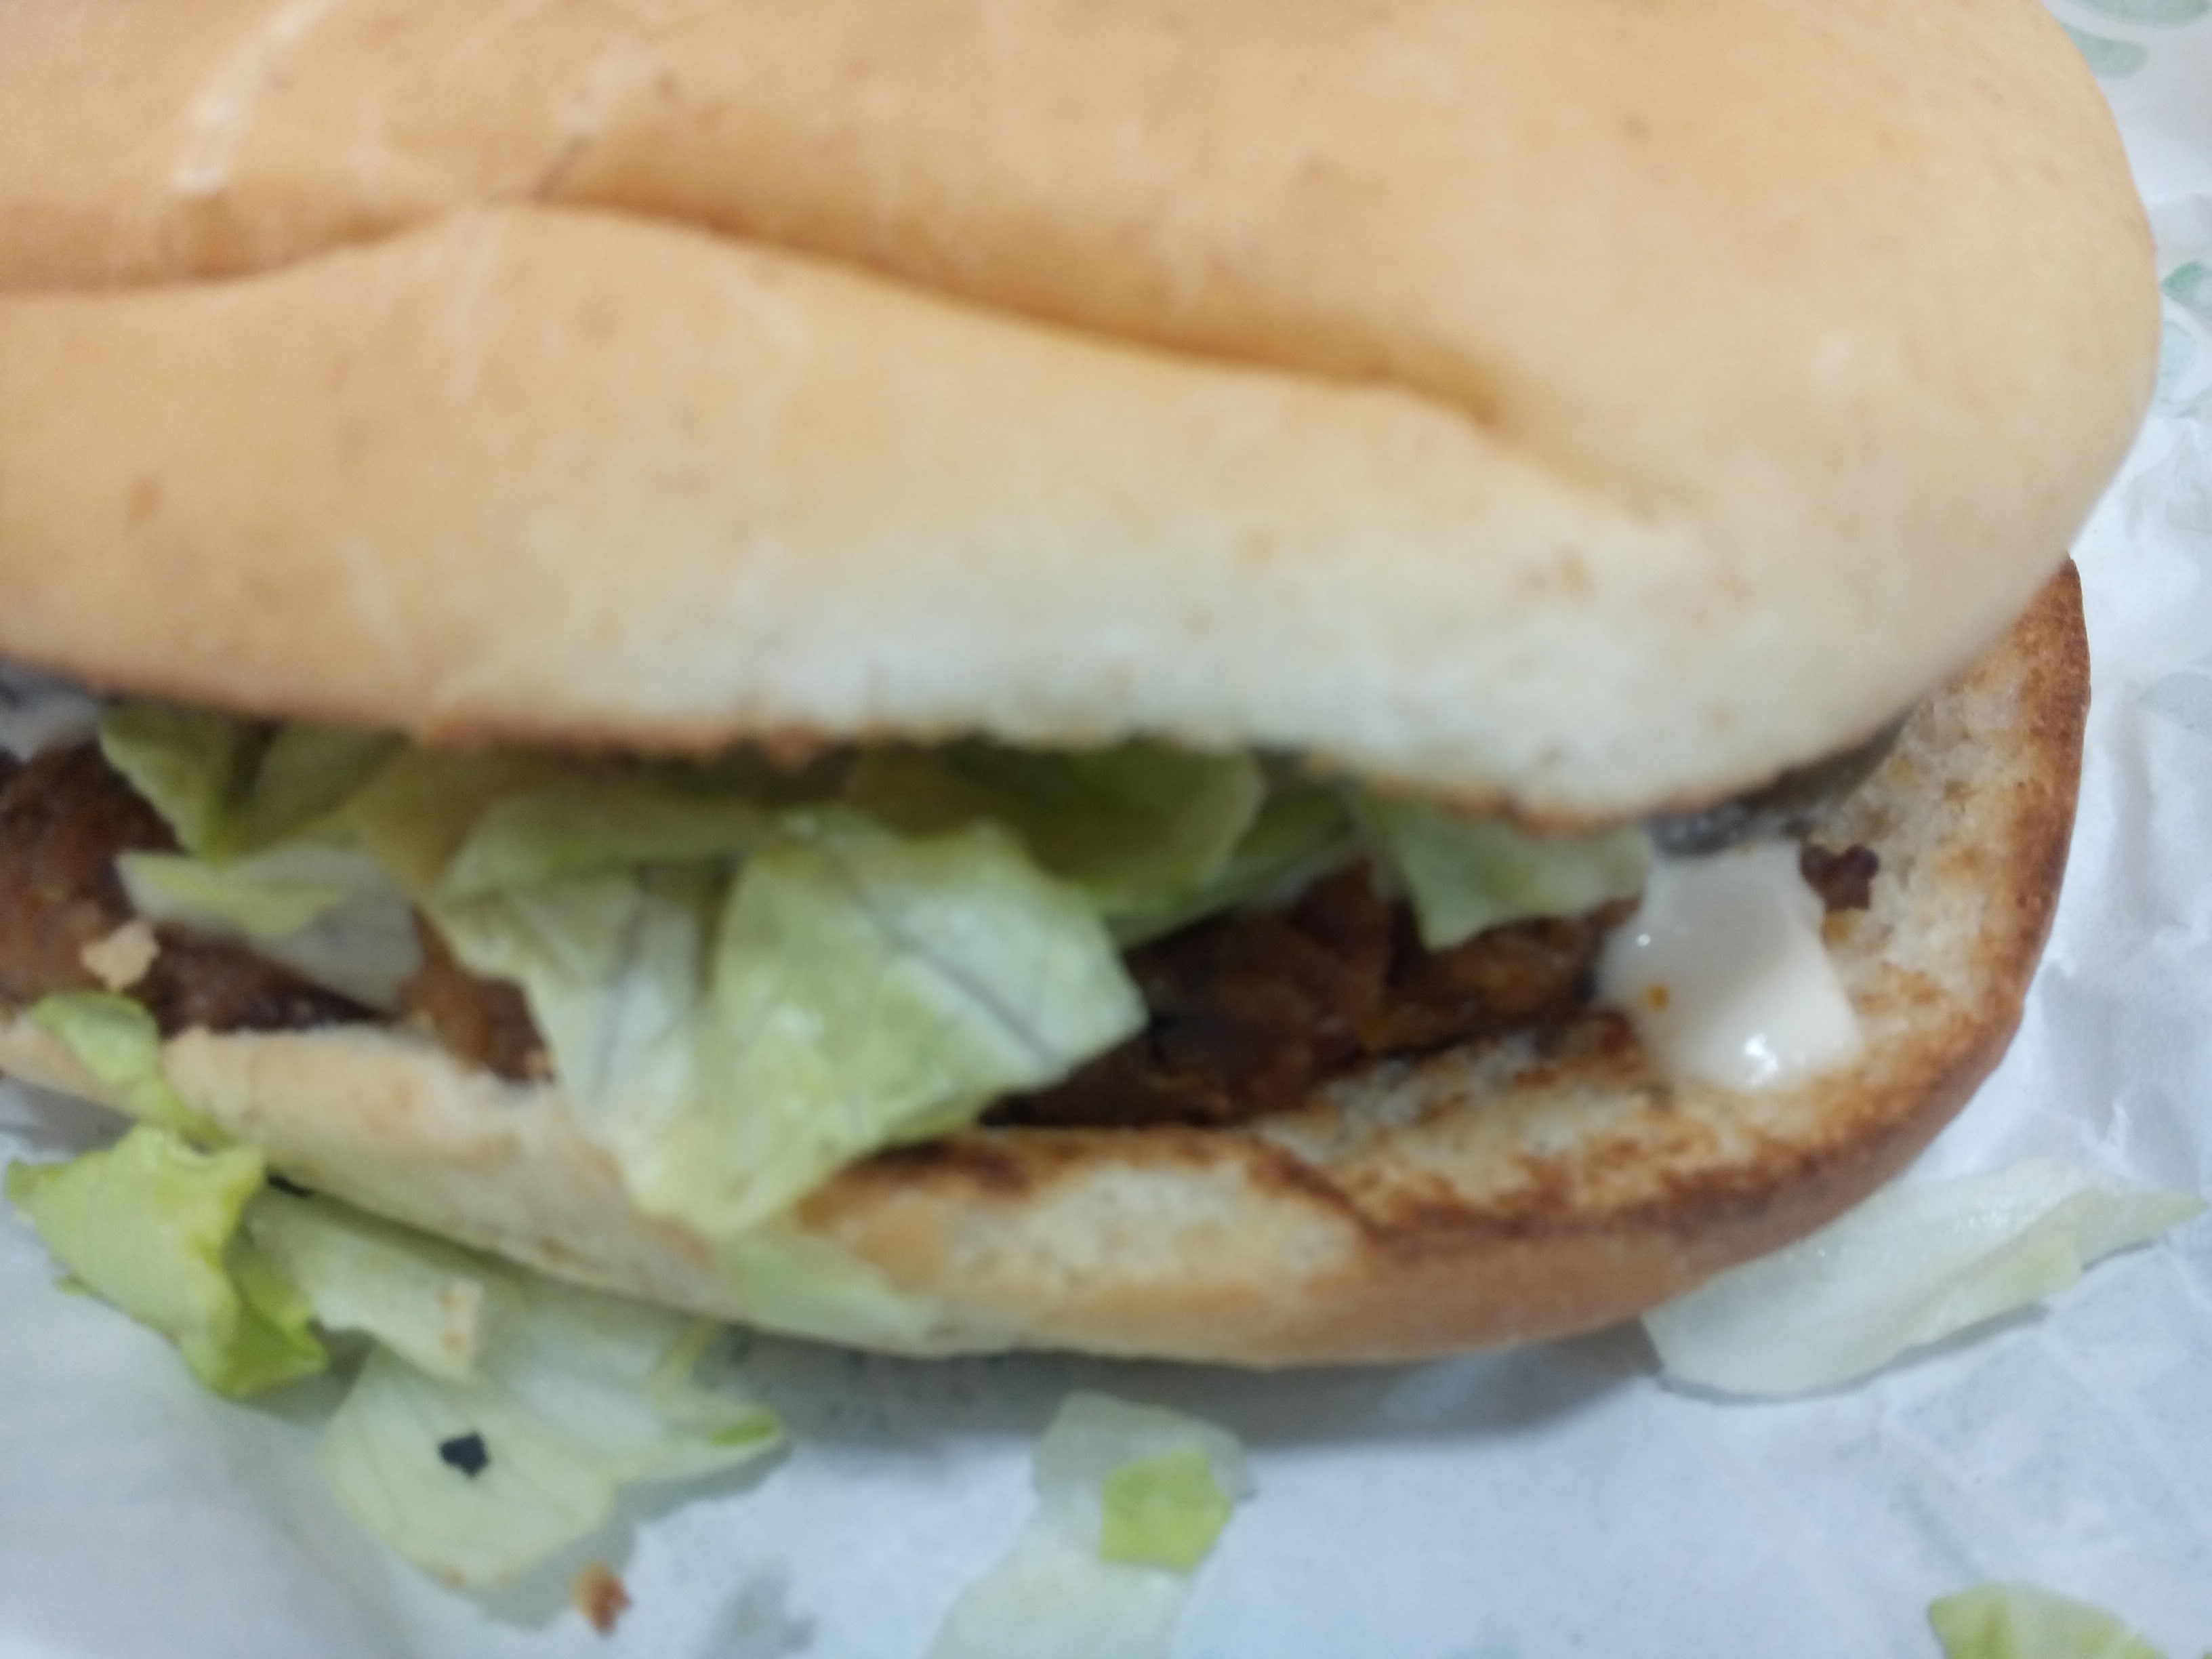 Close up of a bland looking burger bun with lettuce, sauce, and a bit of burger poking out